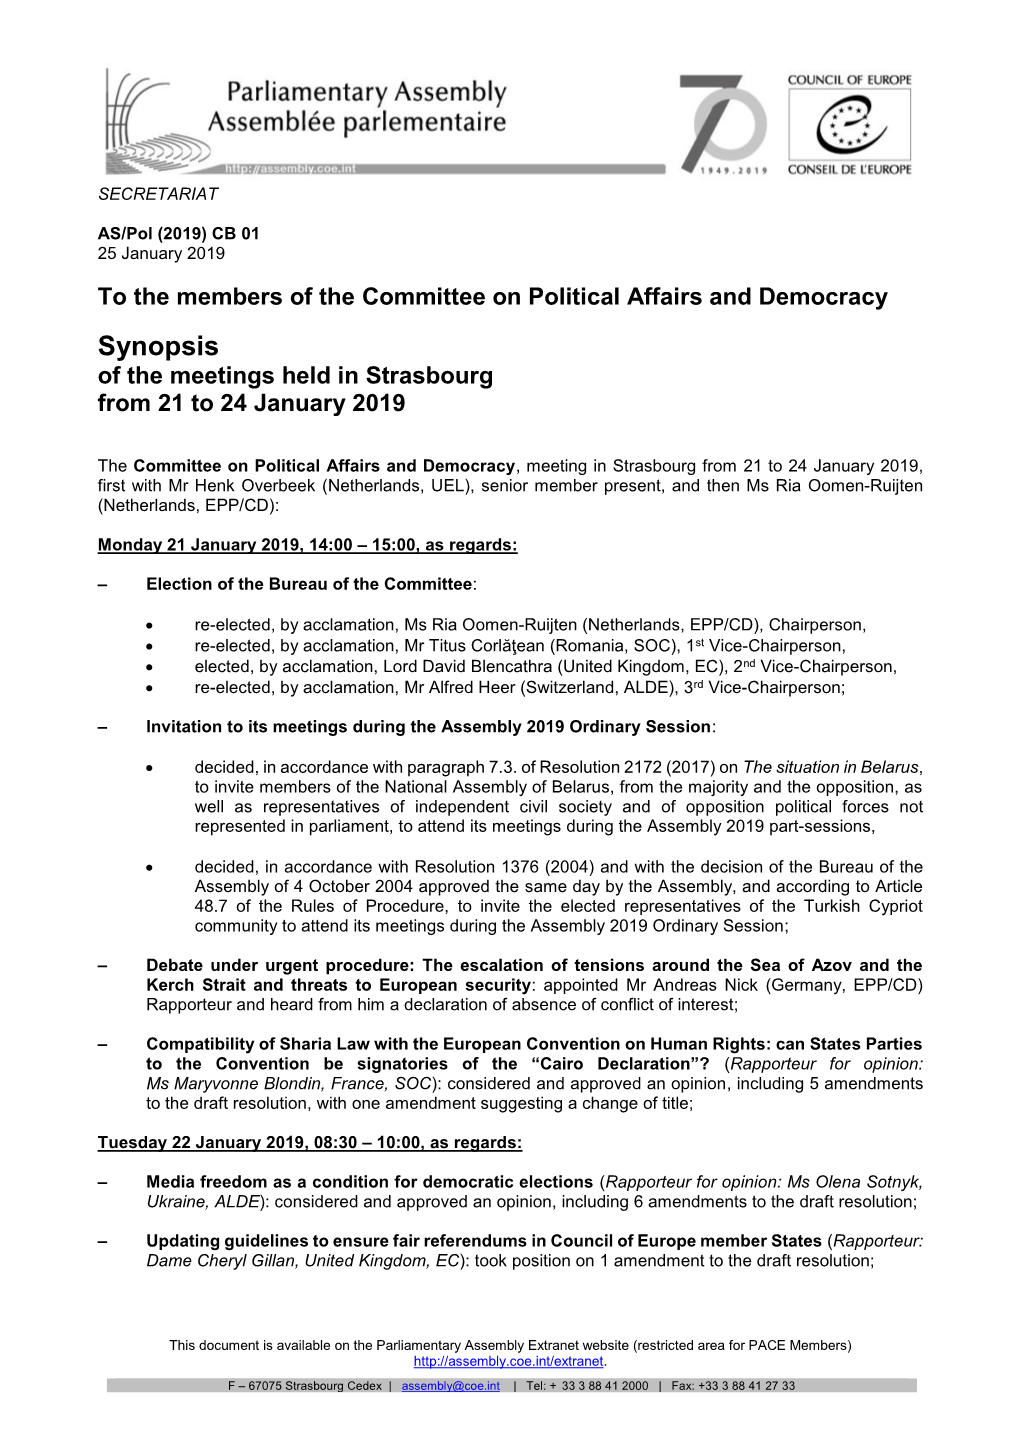 Synopsis of the Meetings Held in Strasbourg from 21 to 24 January 2019